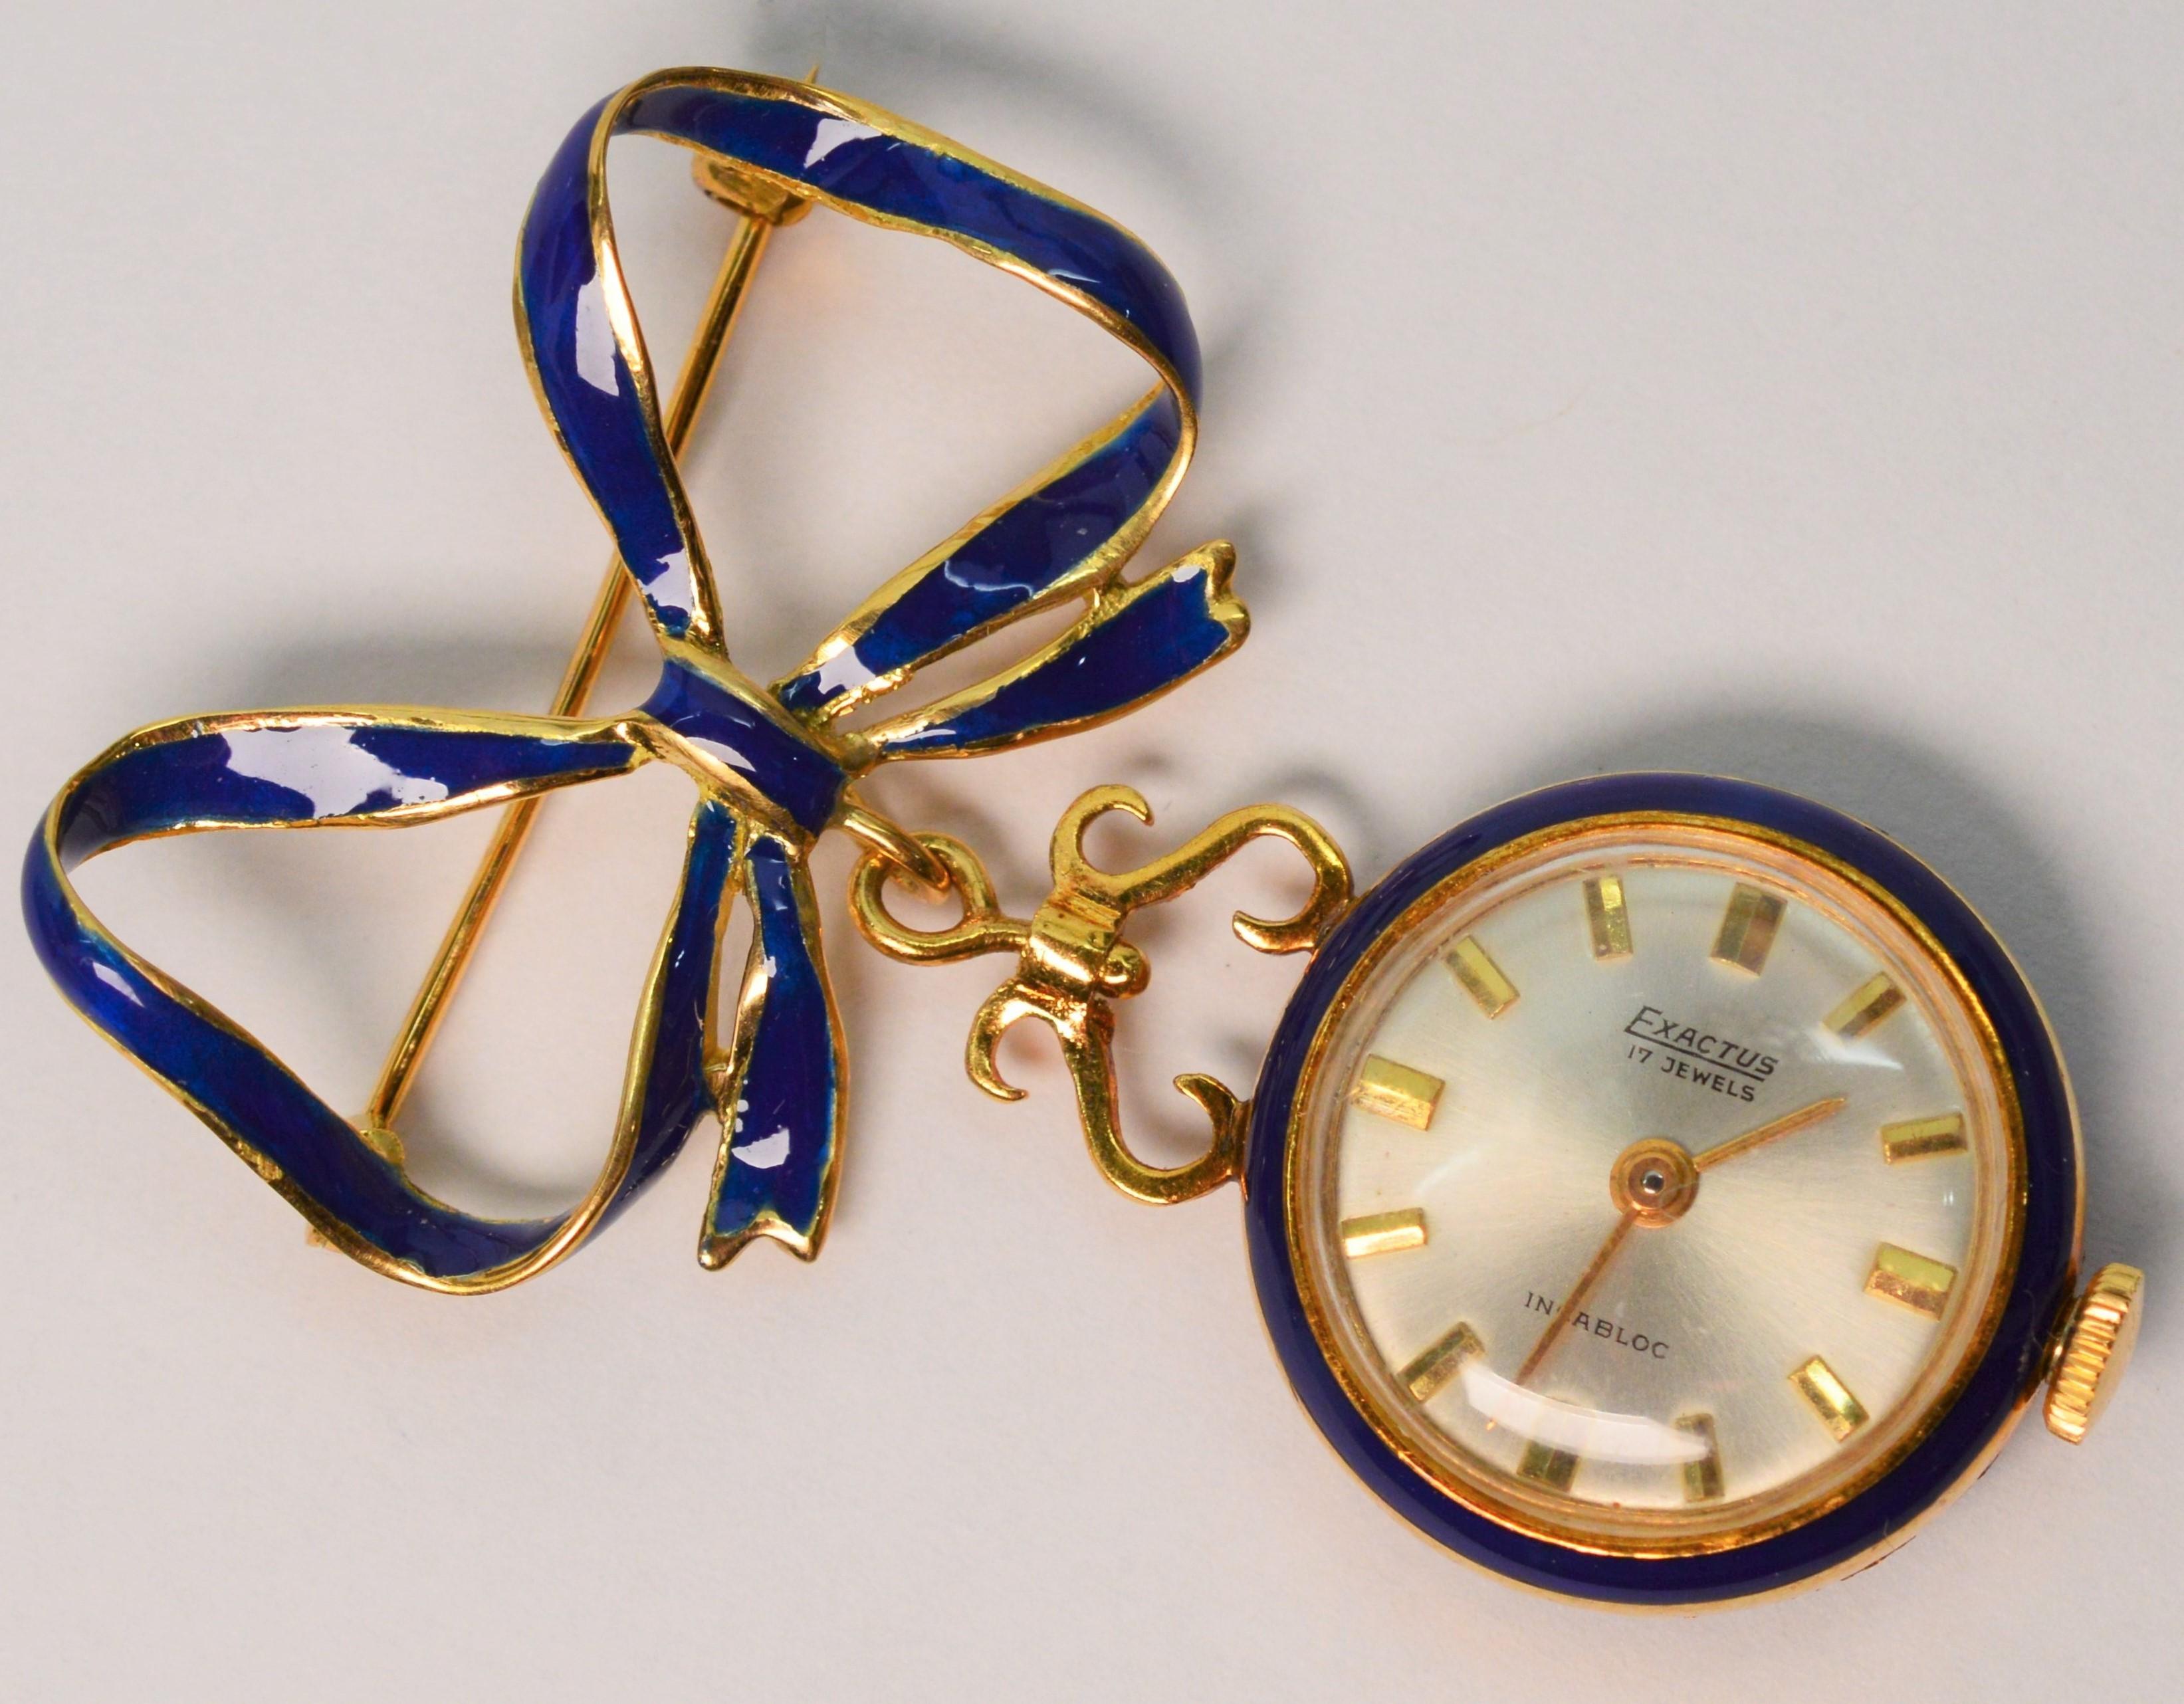 Italian Made Gold Watch Brooch with Blue Enamel Accents For Sale 2